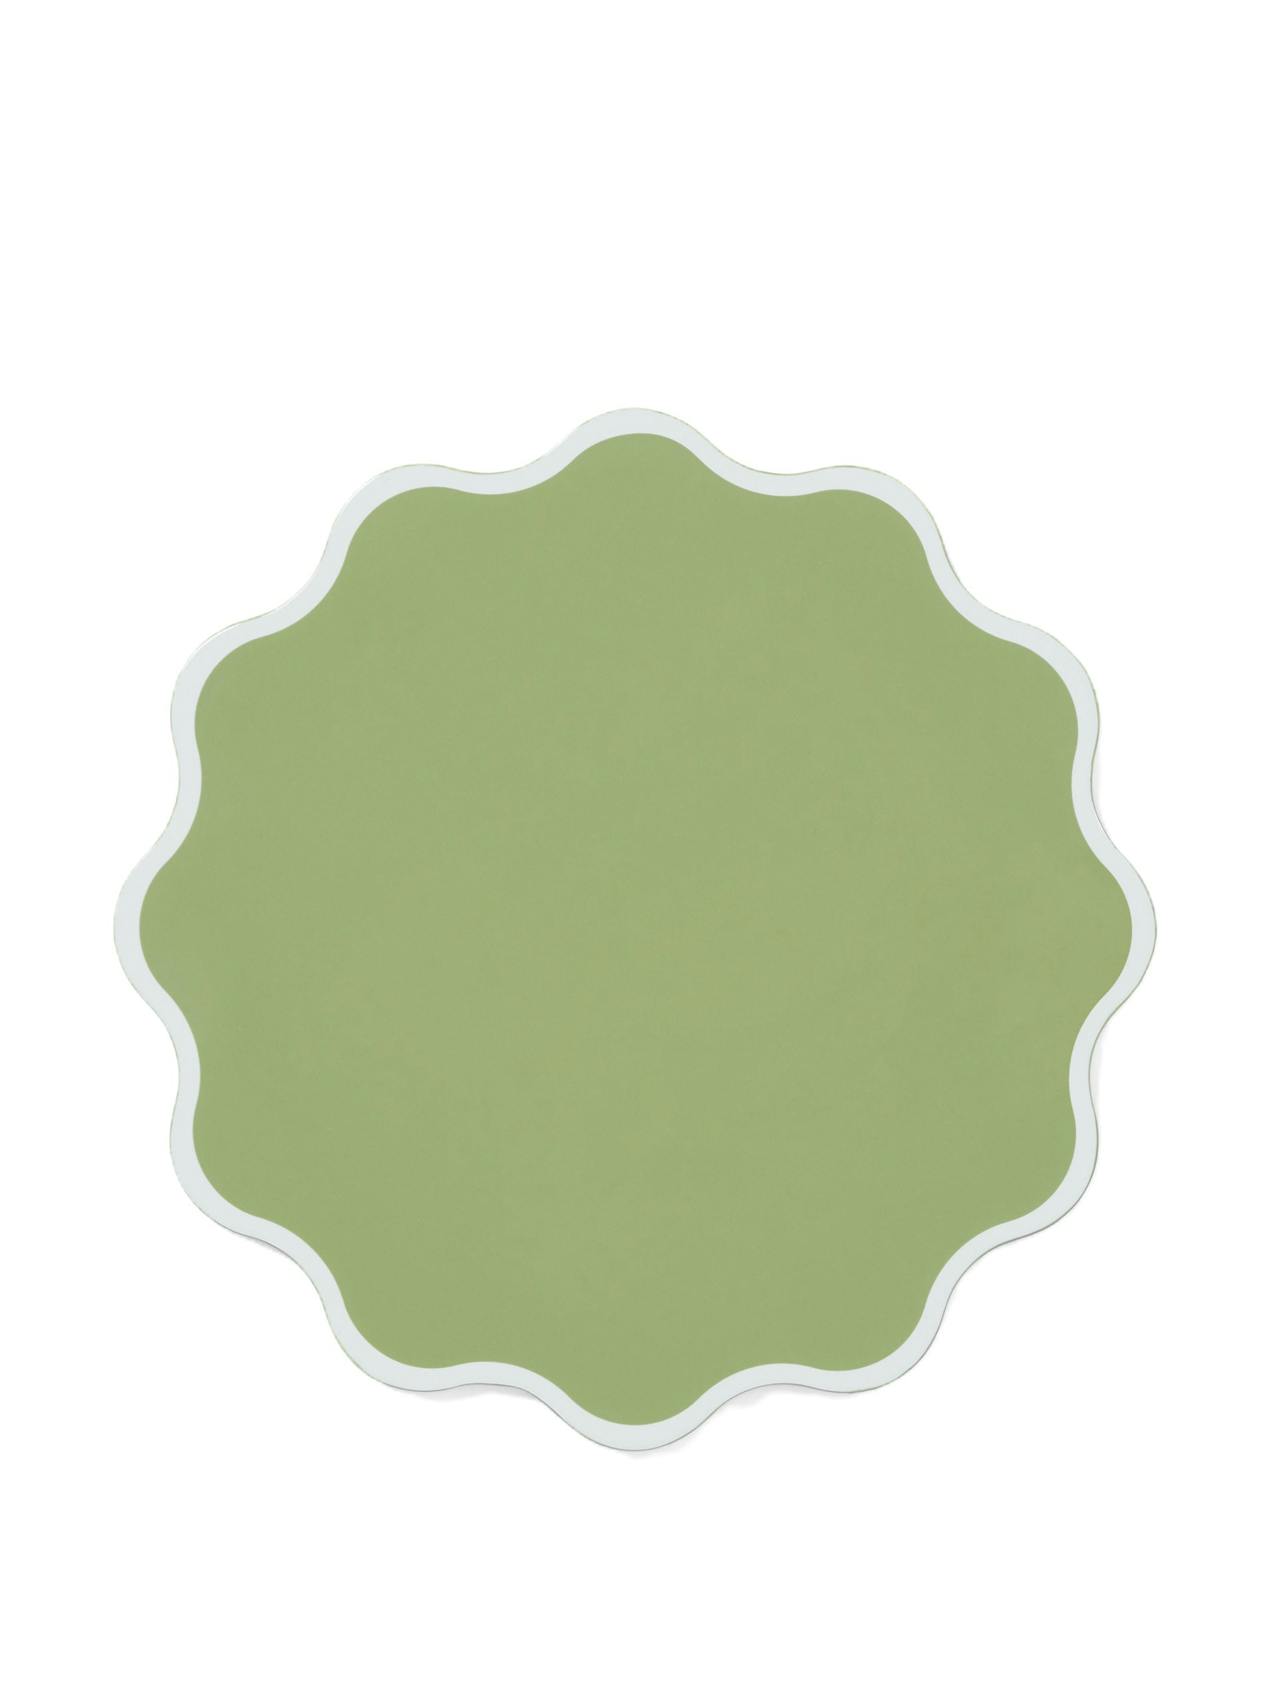 Wiggle placemat in white and green